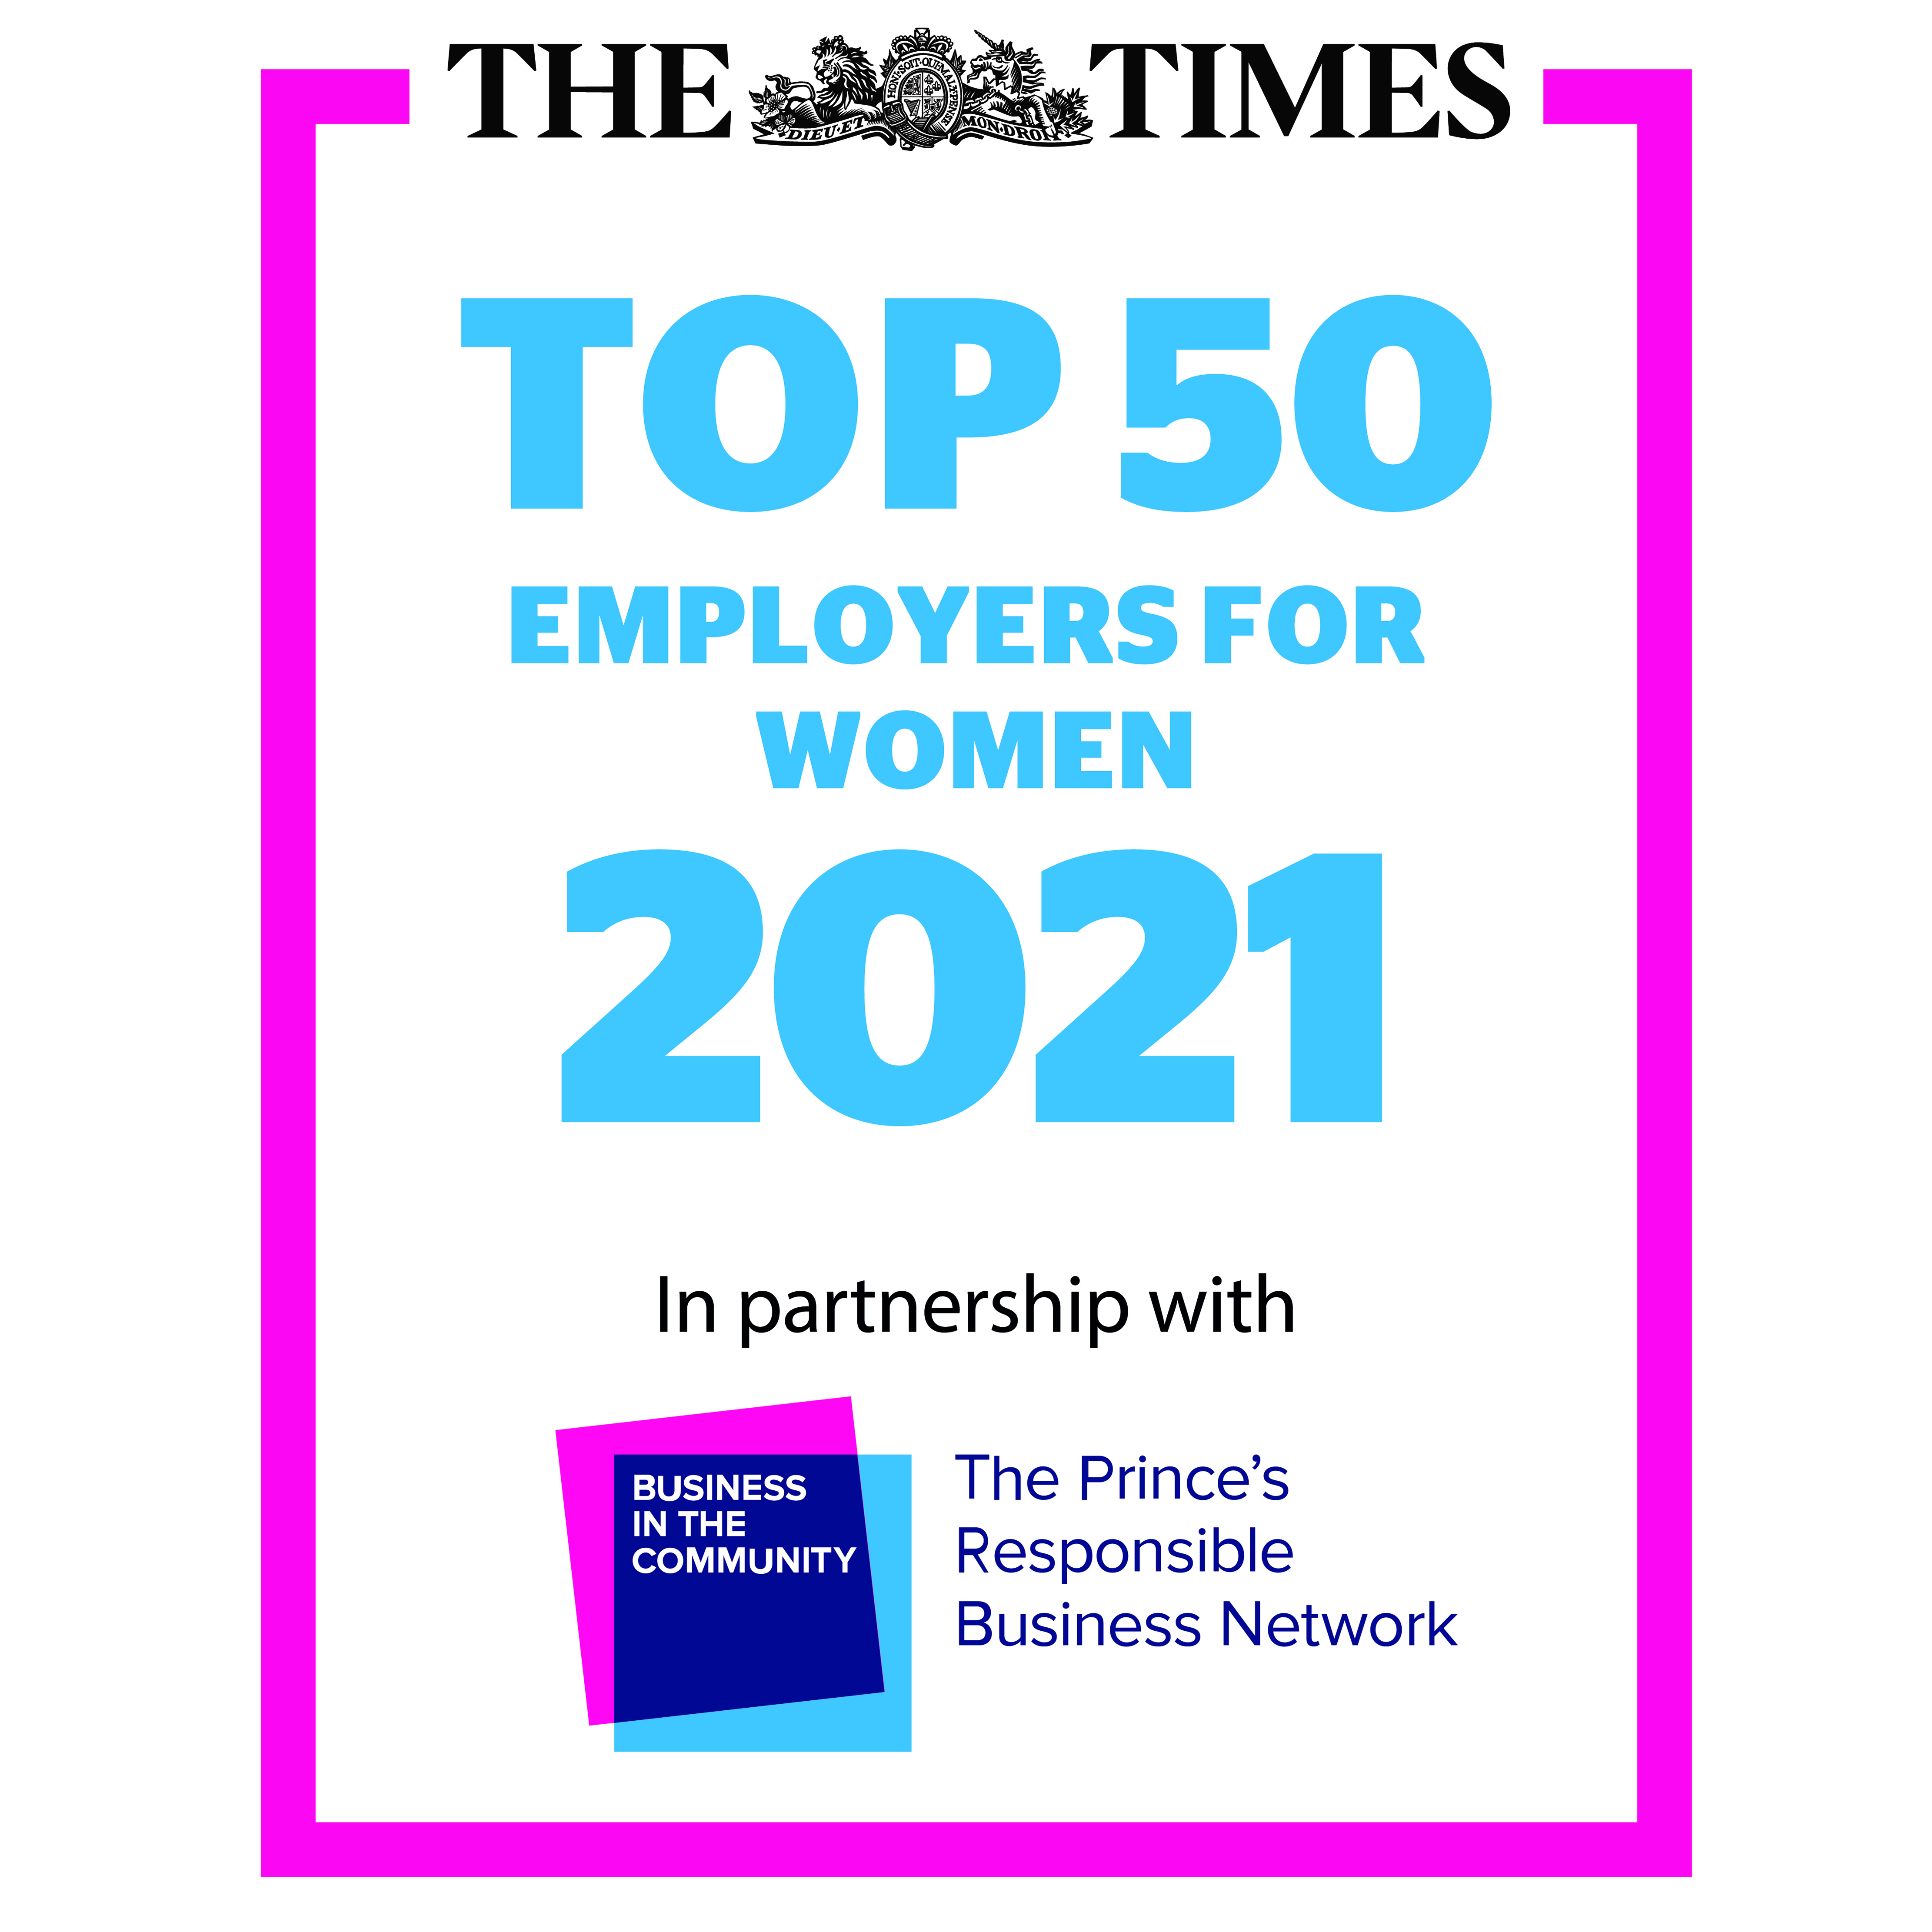 Times top50 employers for women